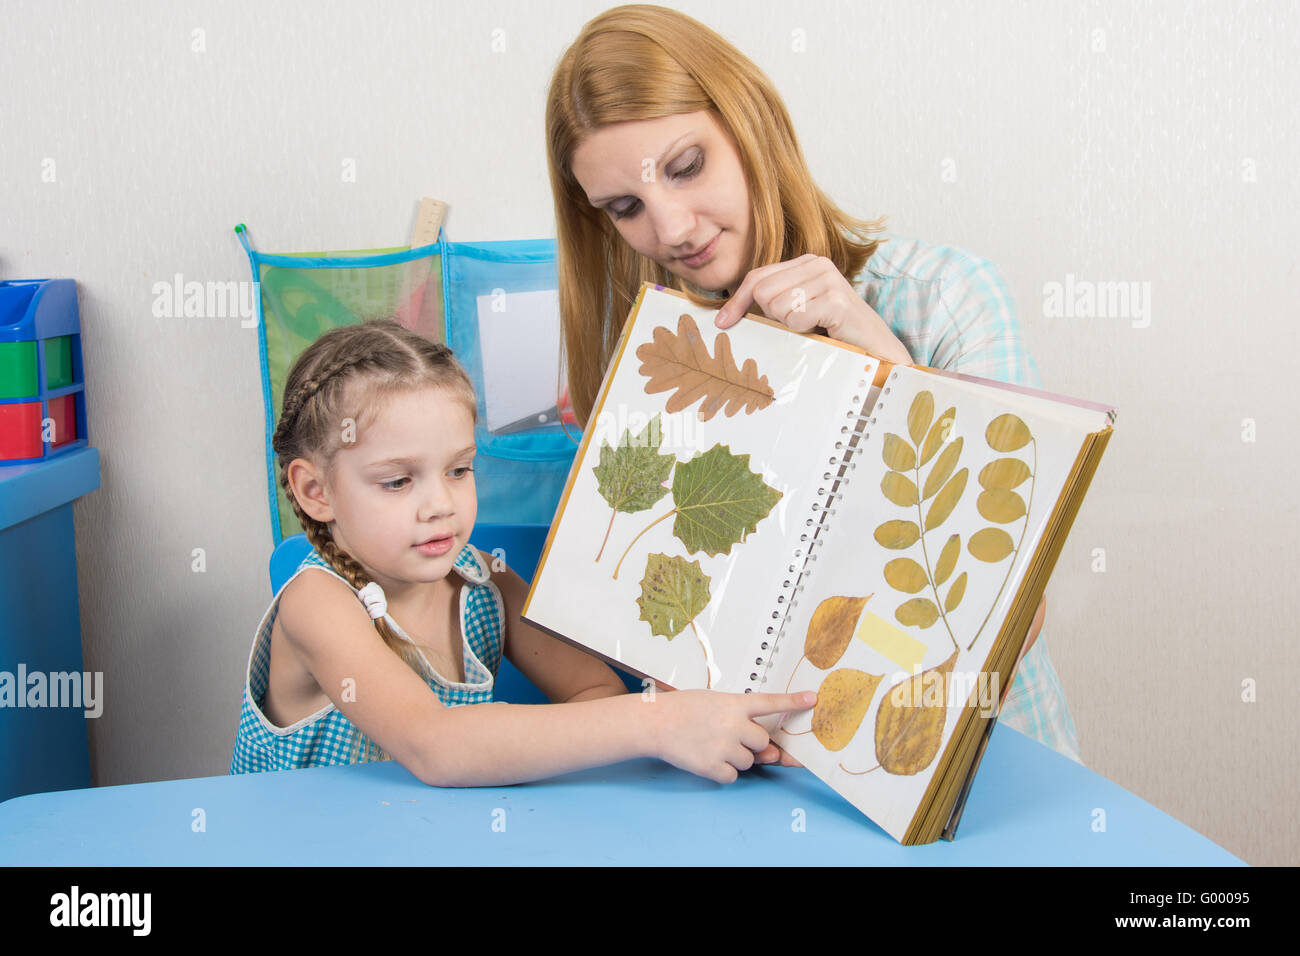 Five-year girl and mother examining herbarium shows on one sheet of an album Stock Photo